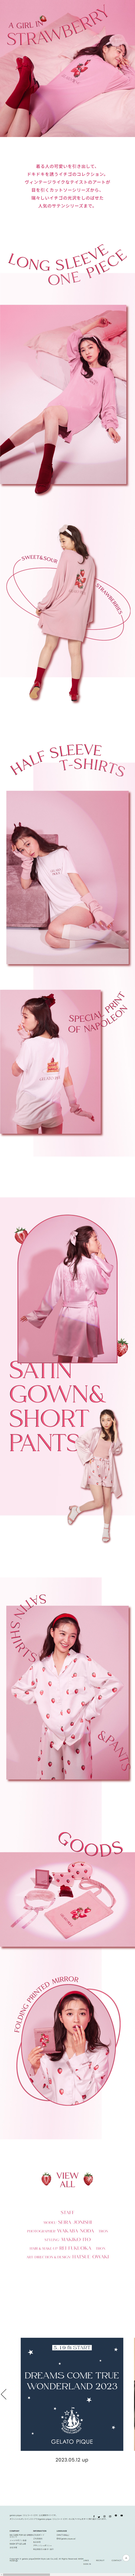 A GIRL IN STRAWBERRY_sp_1